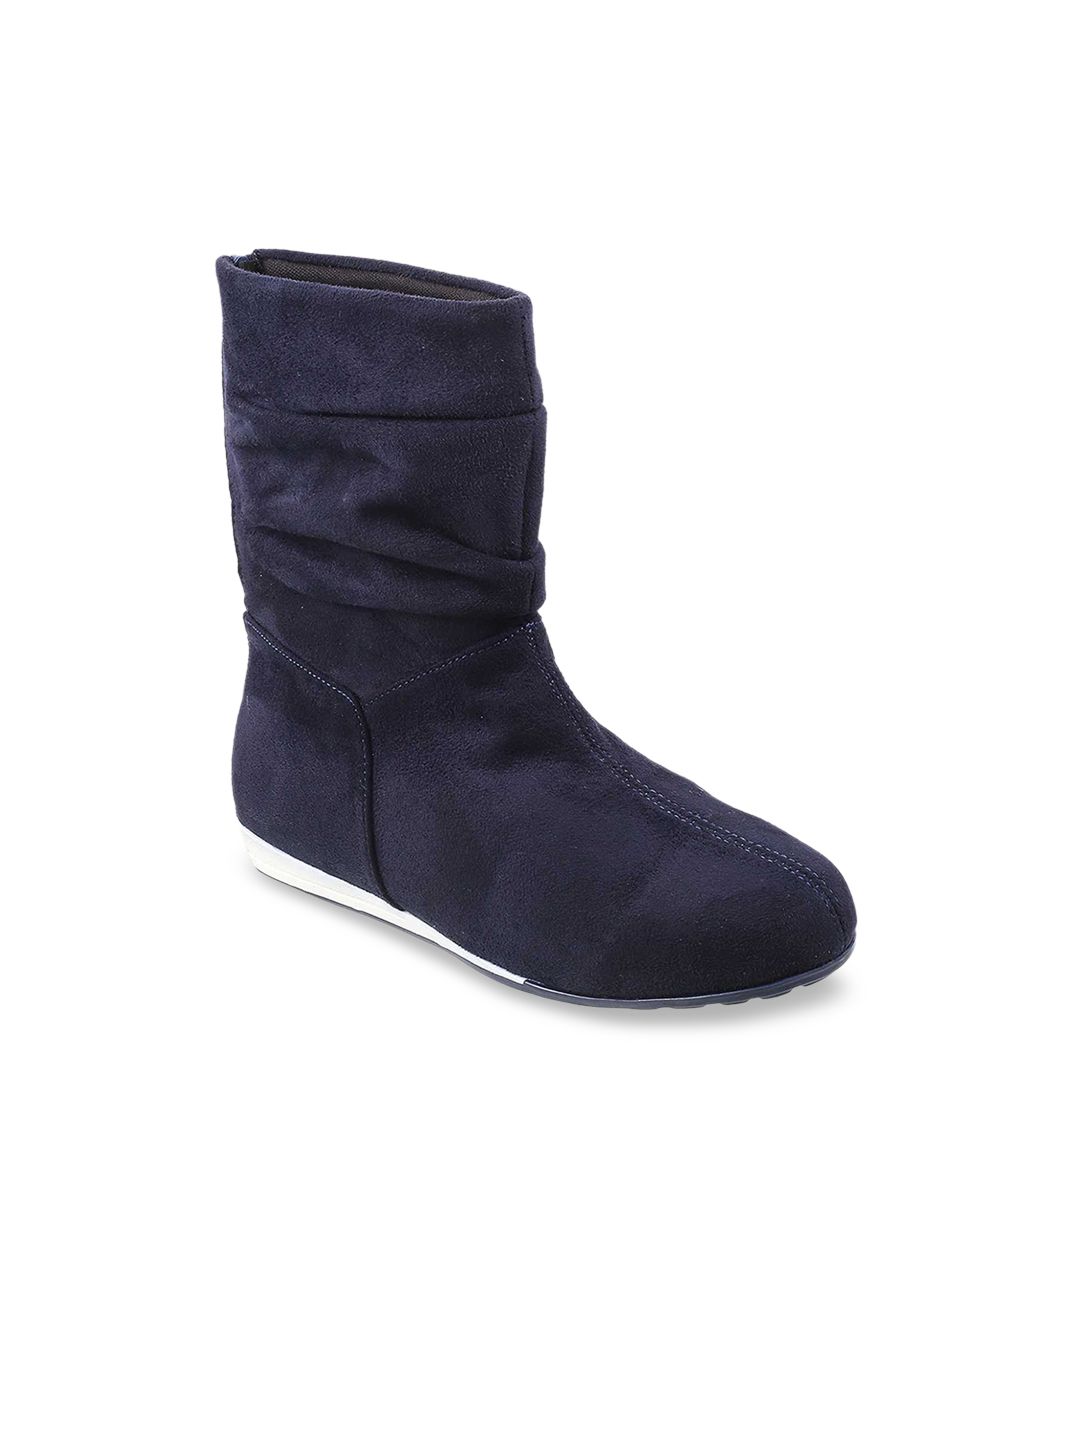 Metro Women Blue High-Top Flat Boots Price in India